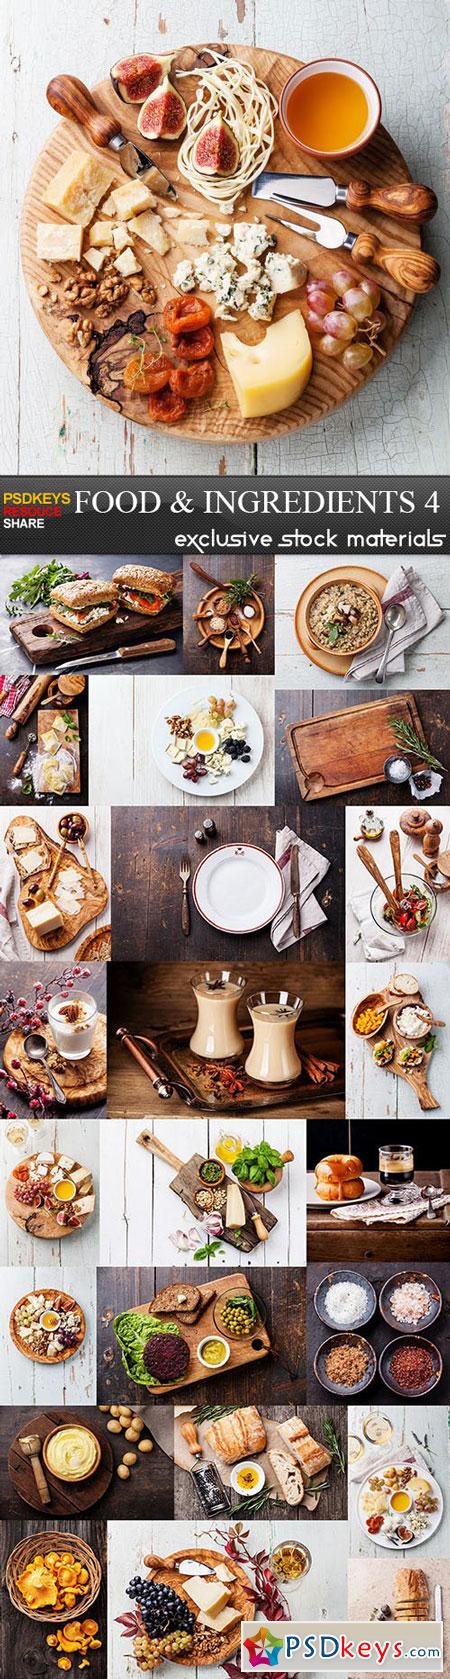 Food and Ingredients 4 - Photo Stock